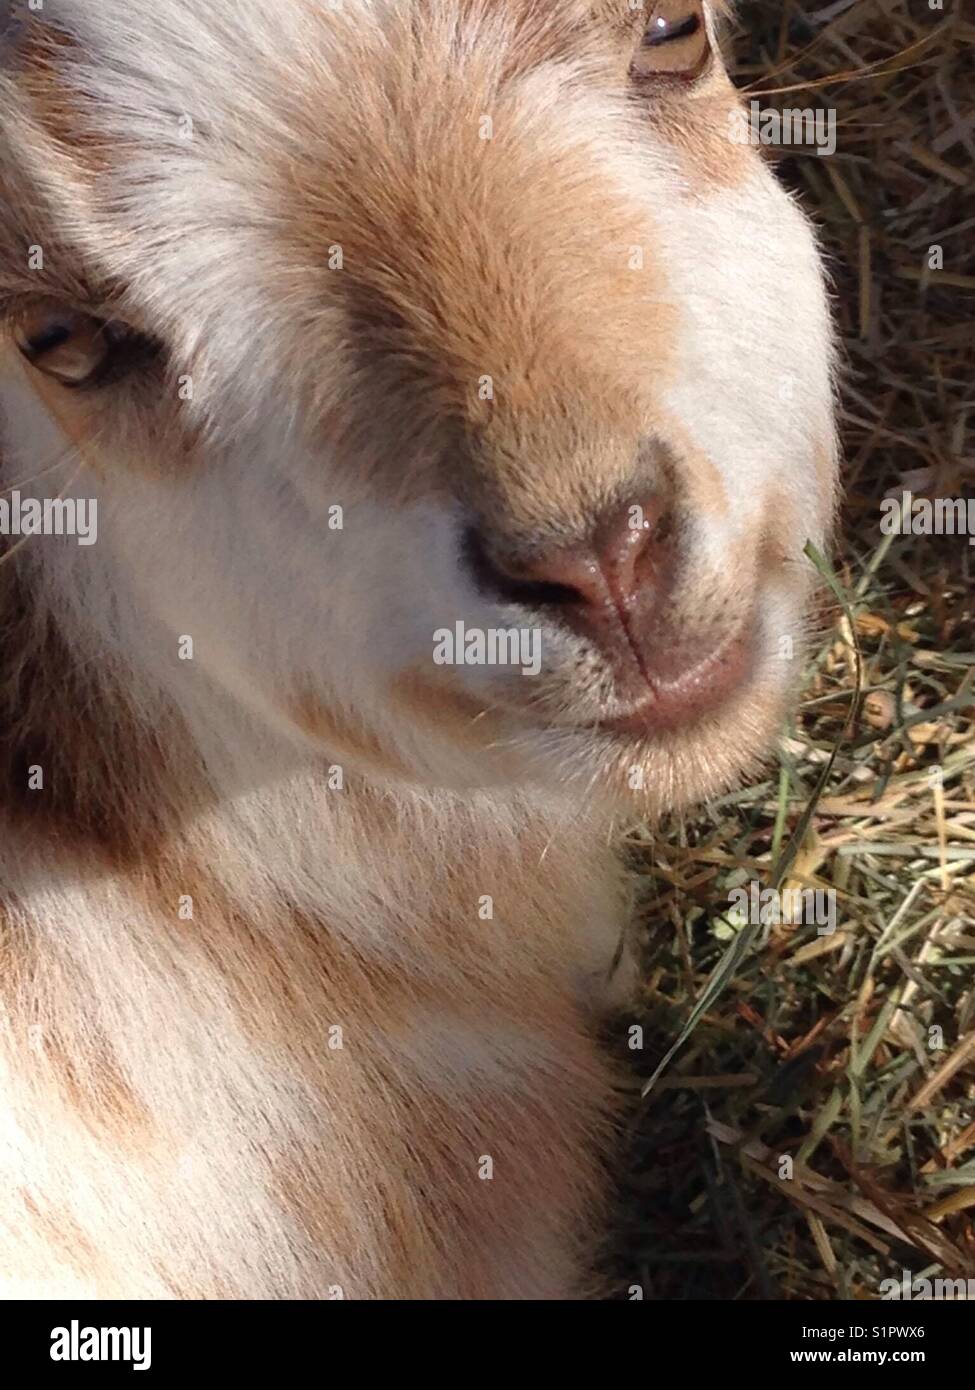 Petting a young, friendly goat Stock Photo